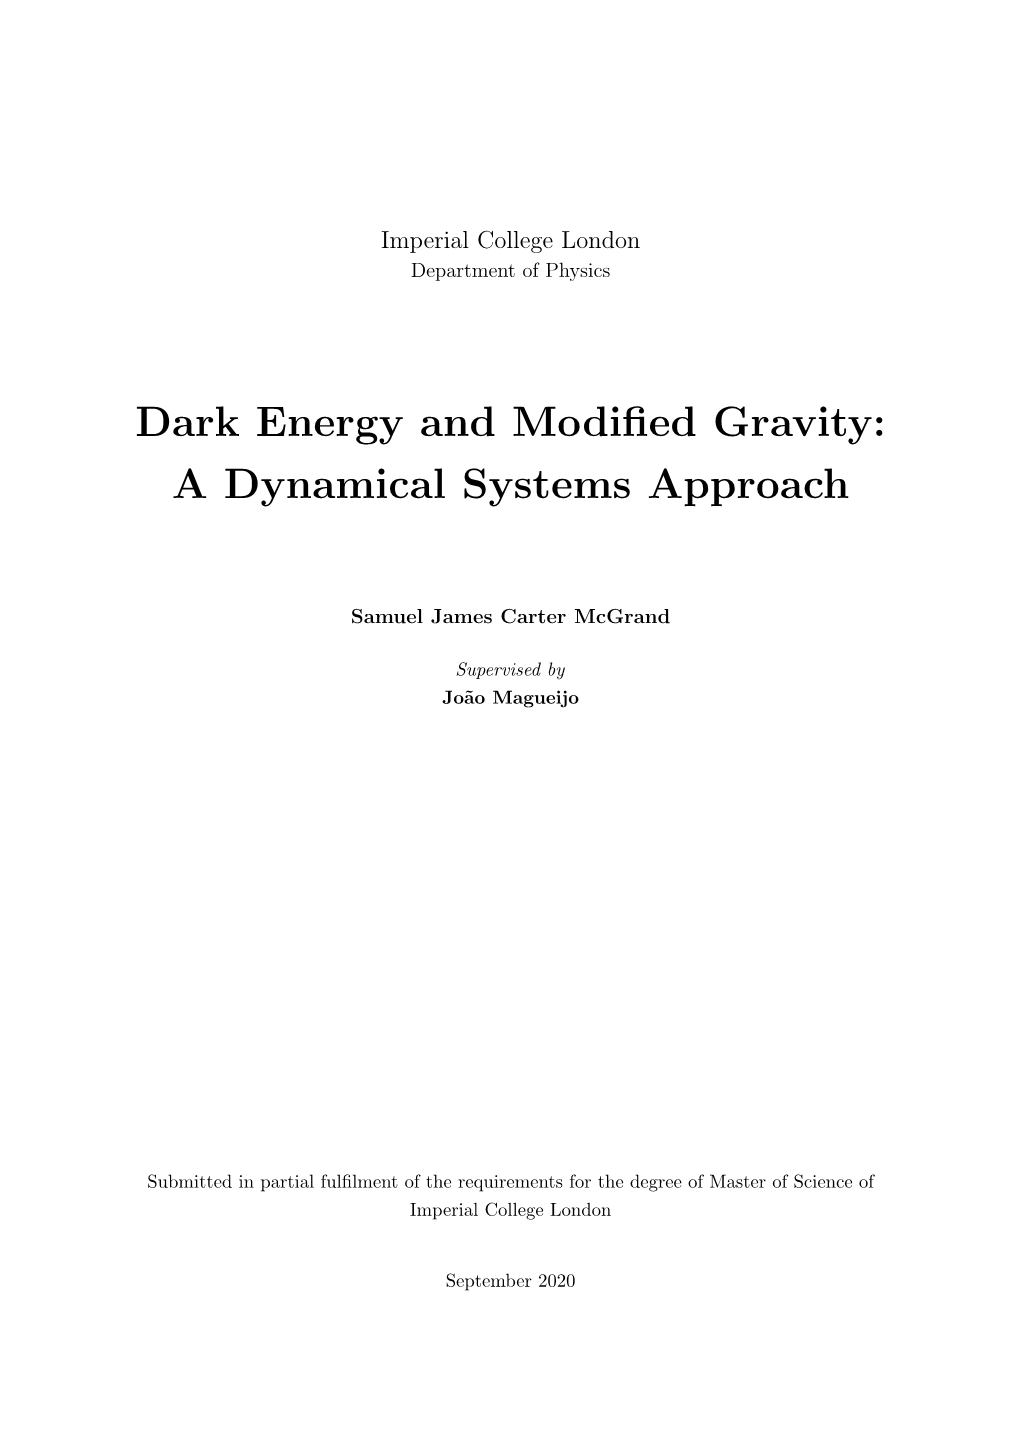 Dark Energy and Modified Gravity: a Dynamical Systems Approach